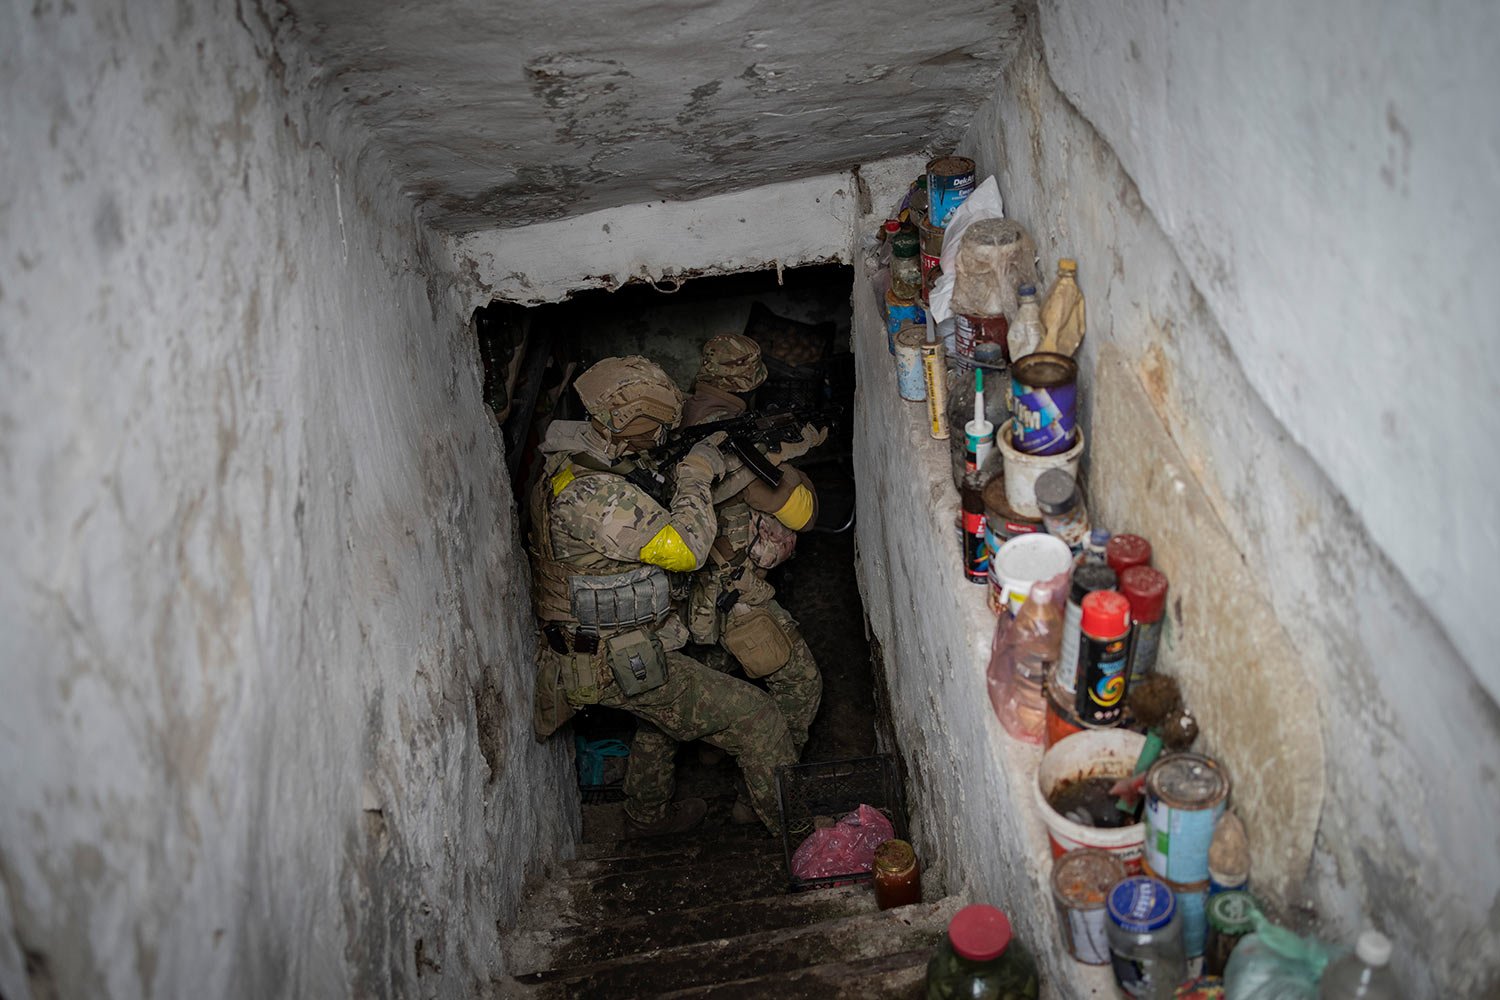  Ukrainian National Guard soldiers inspect a basement during a reconnaissance mission in a recently retaken village on the outskirts of Kharkiv, east Ukraine, Saturday, May 14, 2022. (AP Photo/Bernat Armangue) 